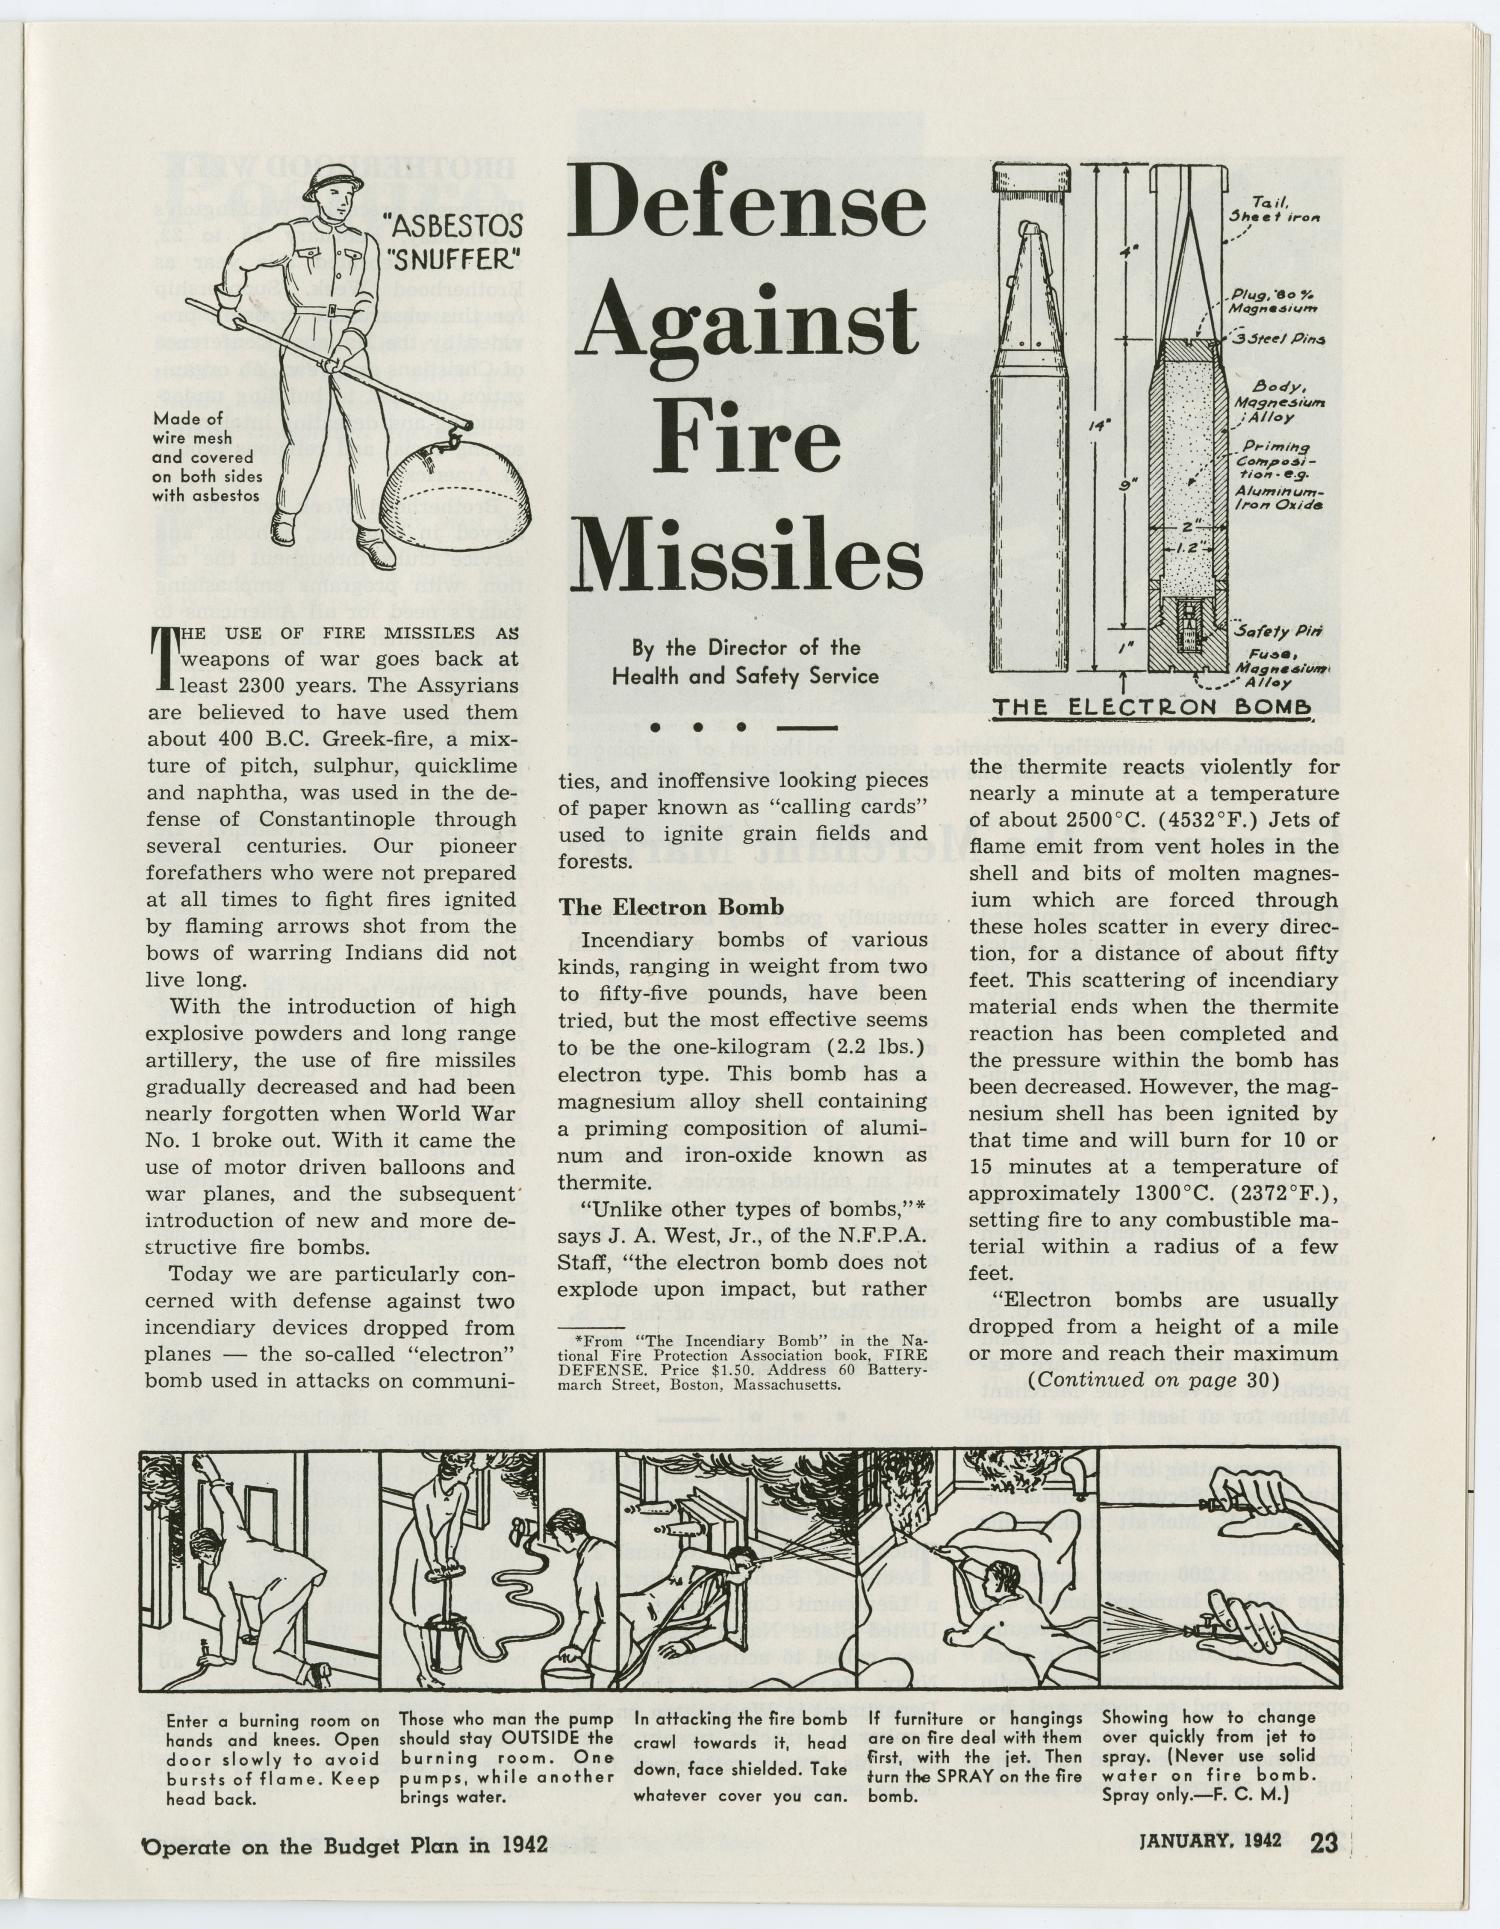 Scouting, Volume 30, Number 1, January 1942
                                                
                                                    23
                                                